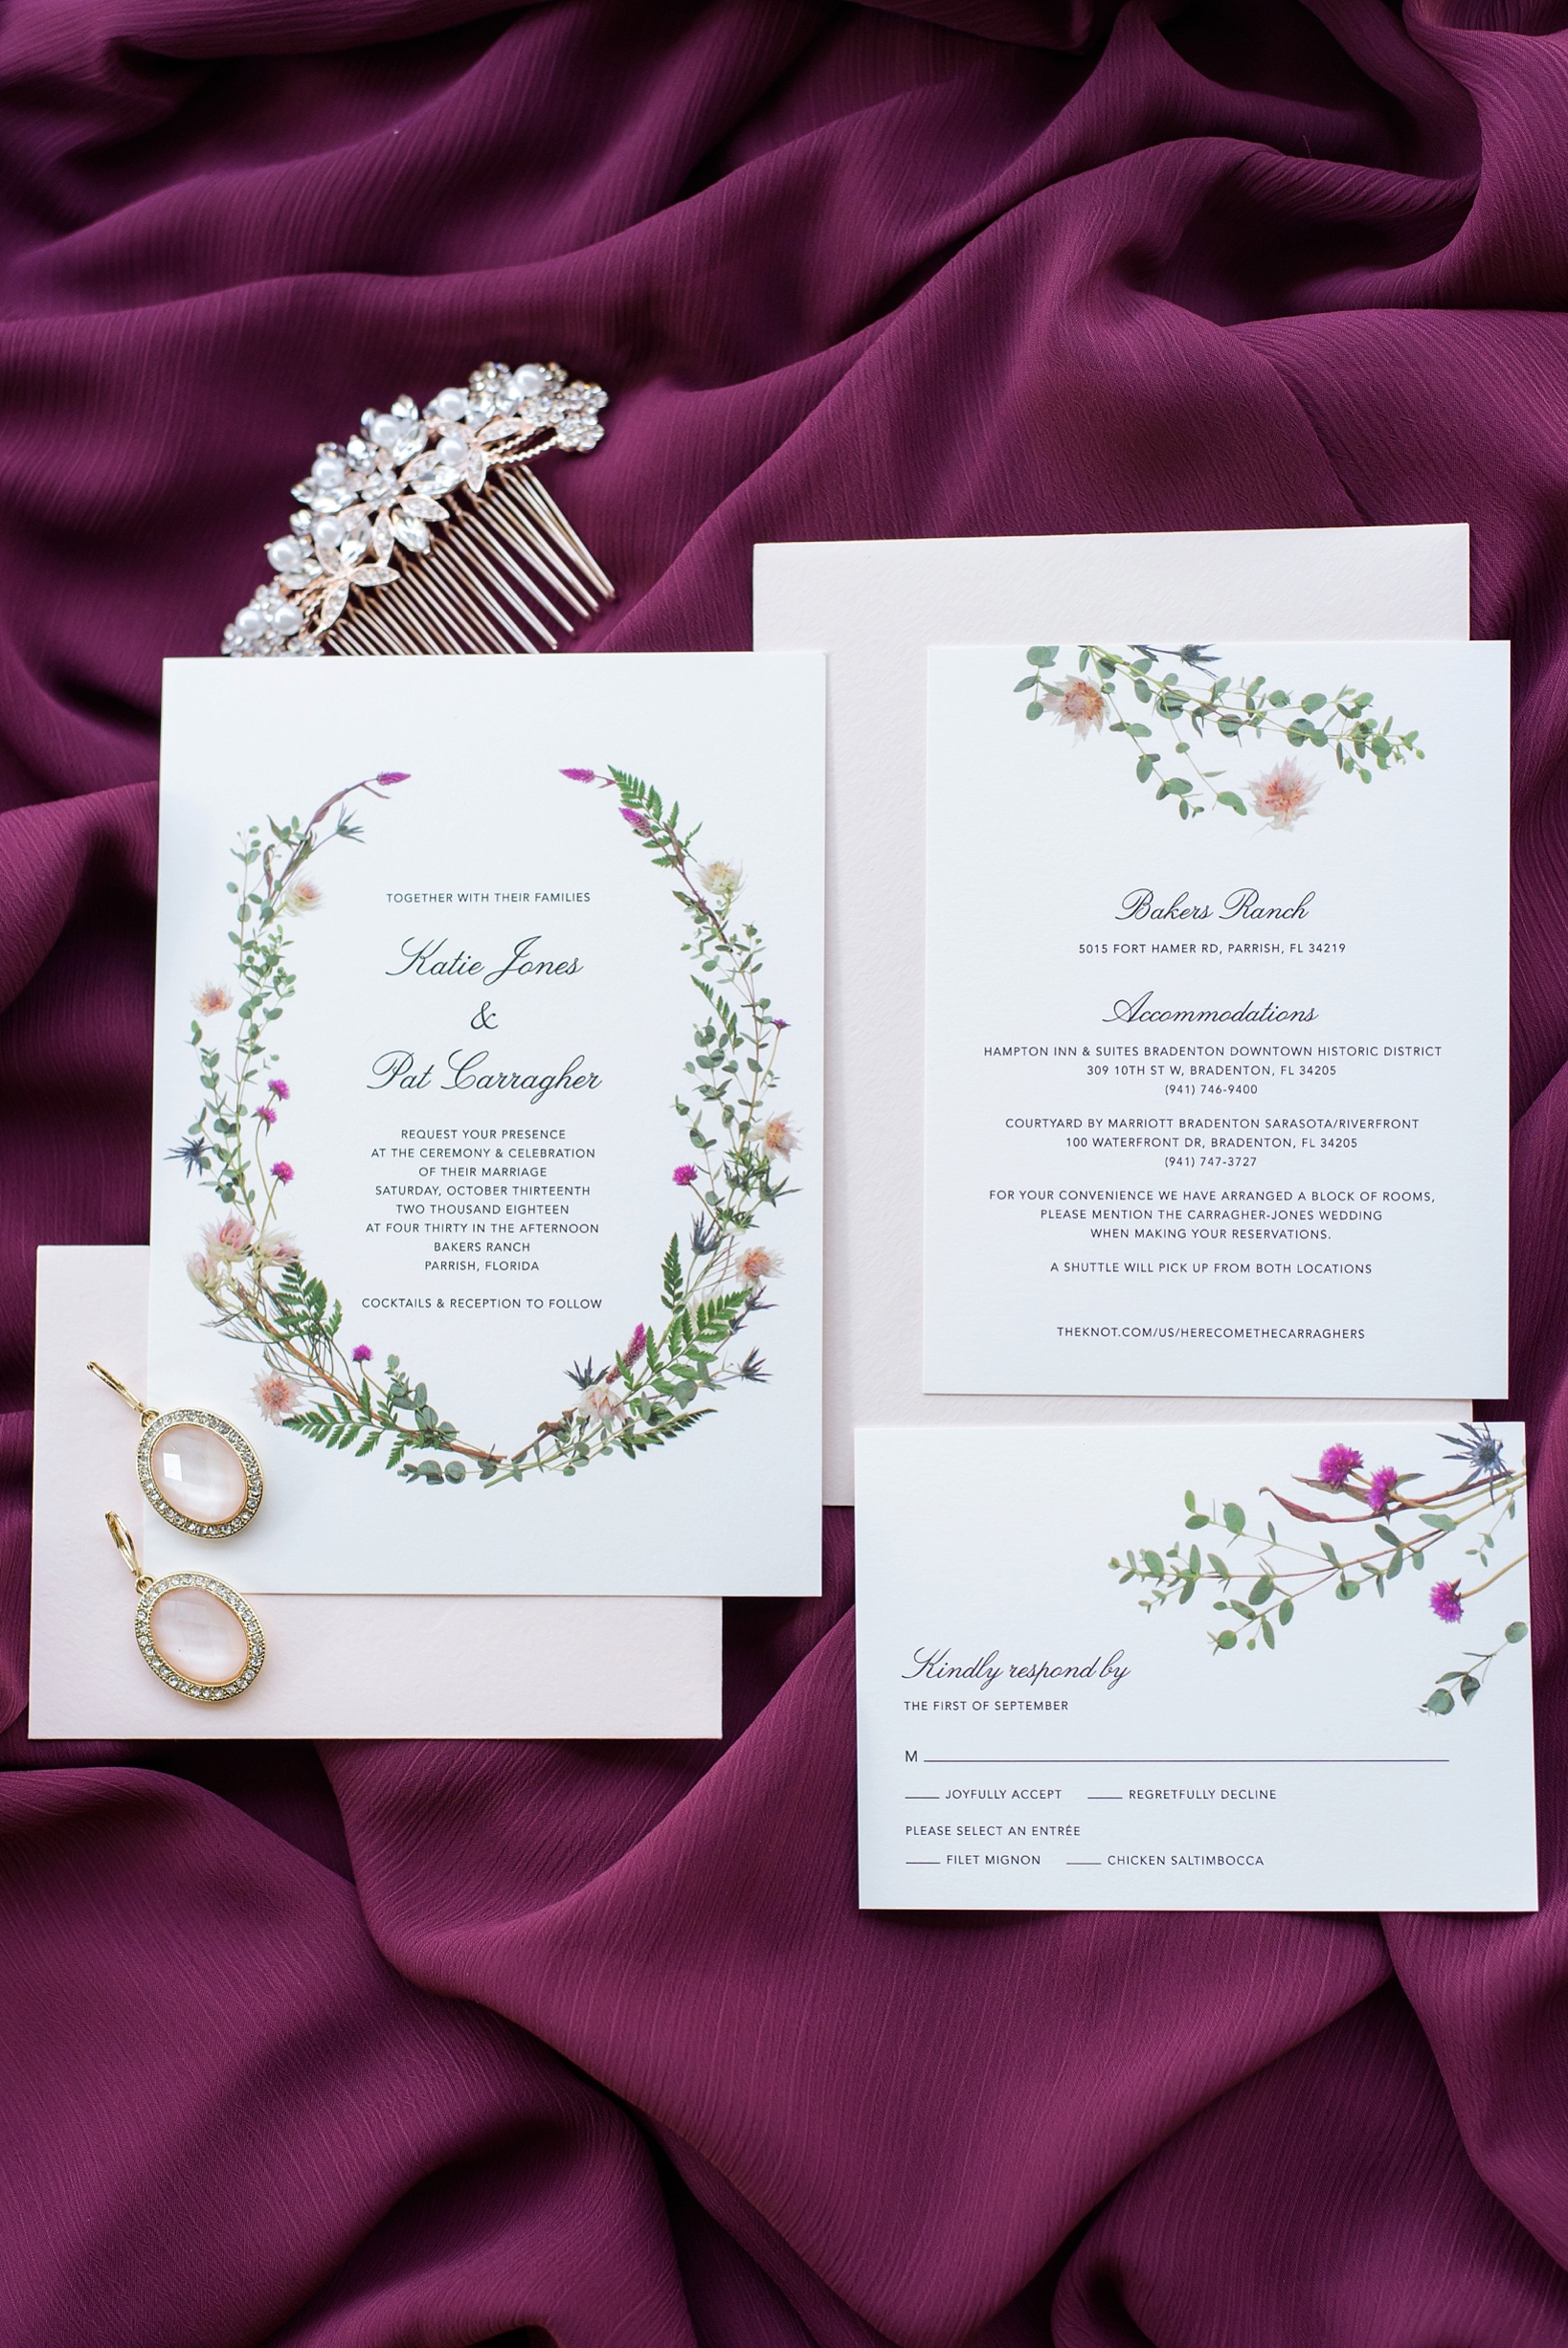 The wedding invitations suite featuring florals and matching bridesmaid dress background by Sarah & Ben Photography located in Tampa, FL